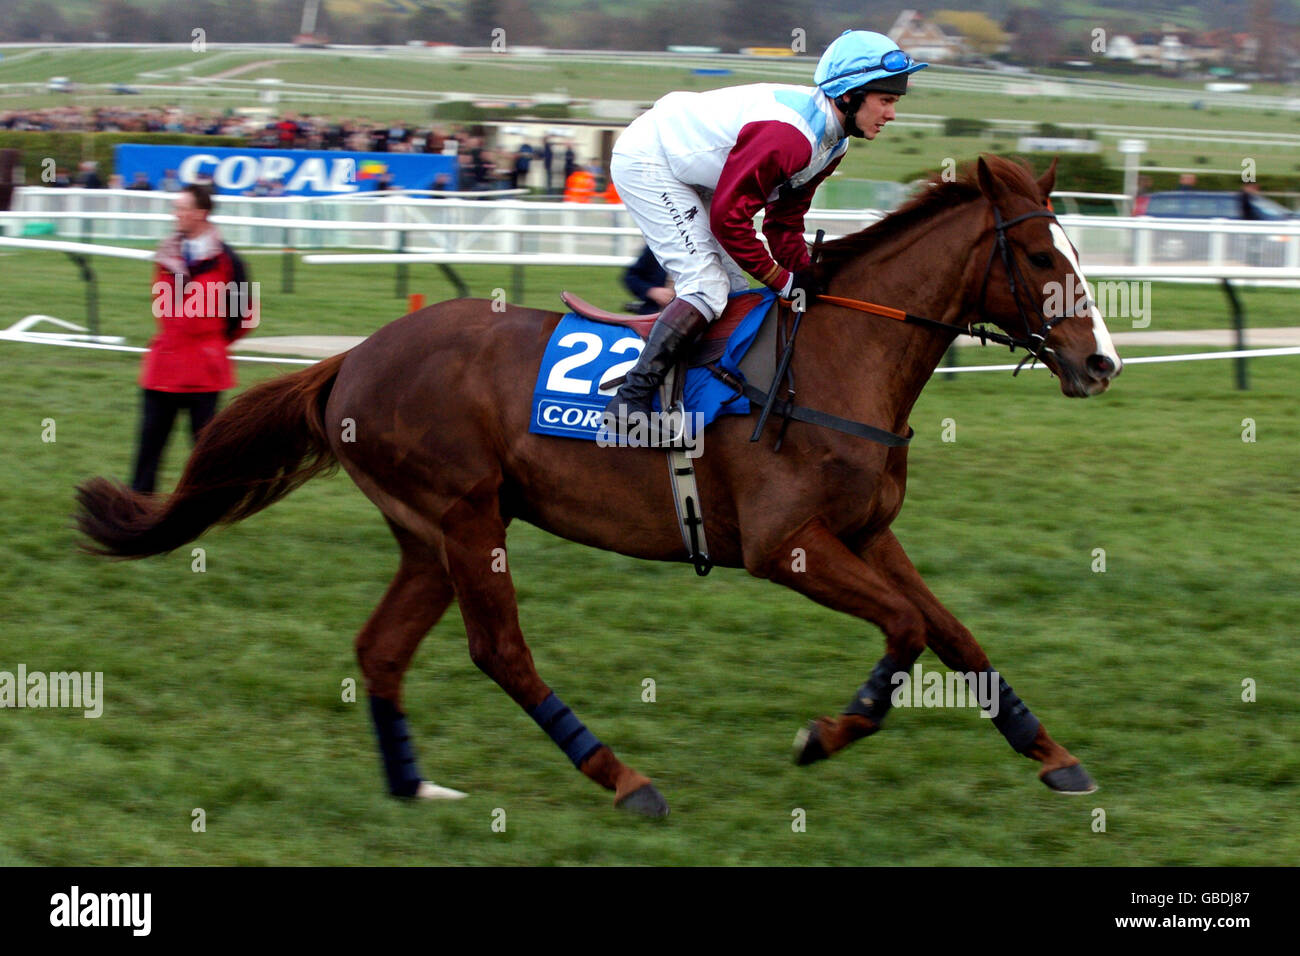 Almaravide ridden by Matthew Batchelor goes to post for The Coral Cup (Handicap Hurdle Race) Stock Photo